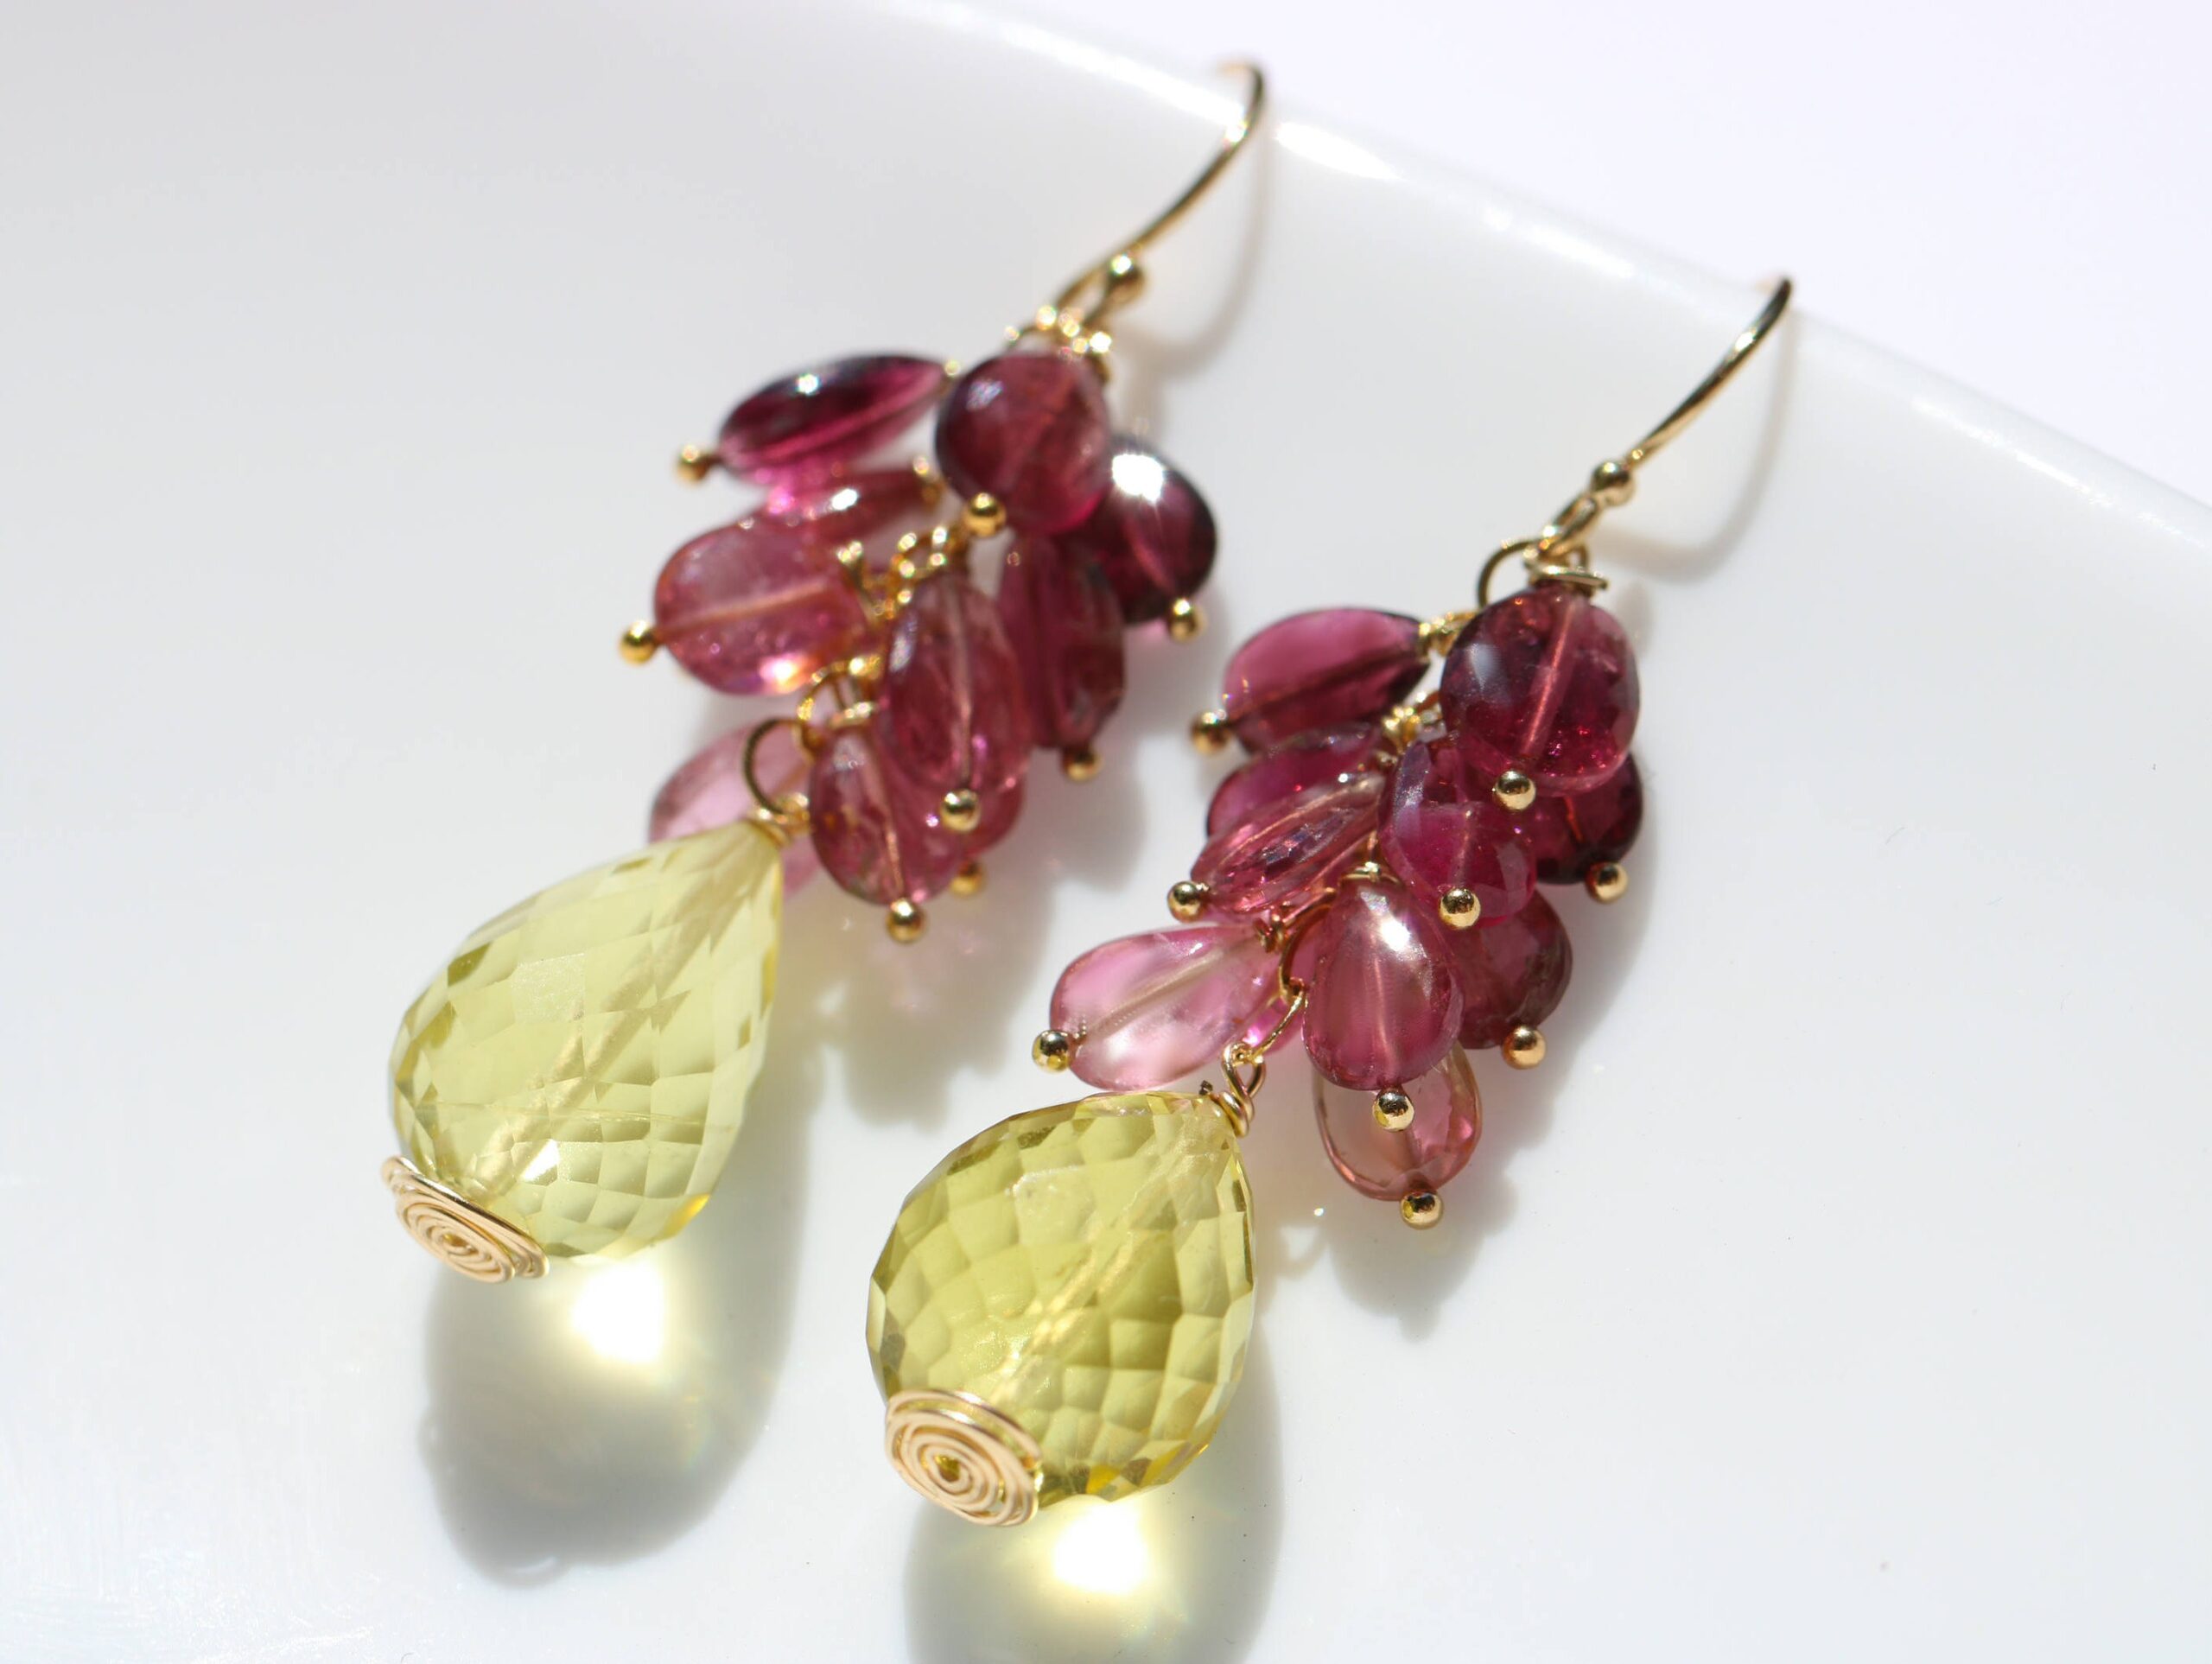 Pink Tourmaline with Lemon Quartz Small Cluster Earrings in Gold Filled